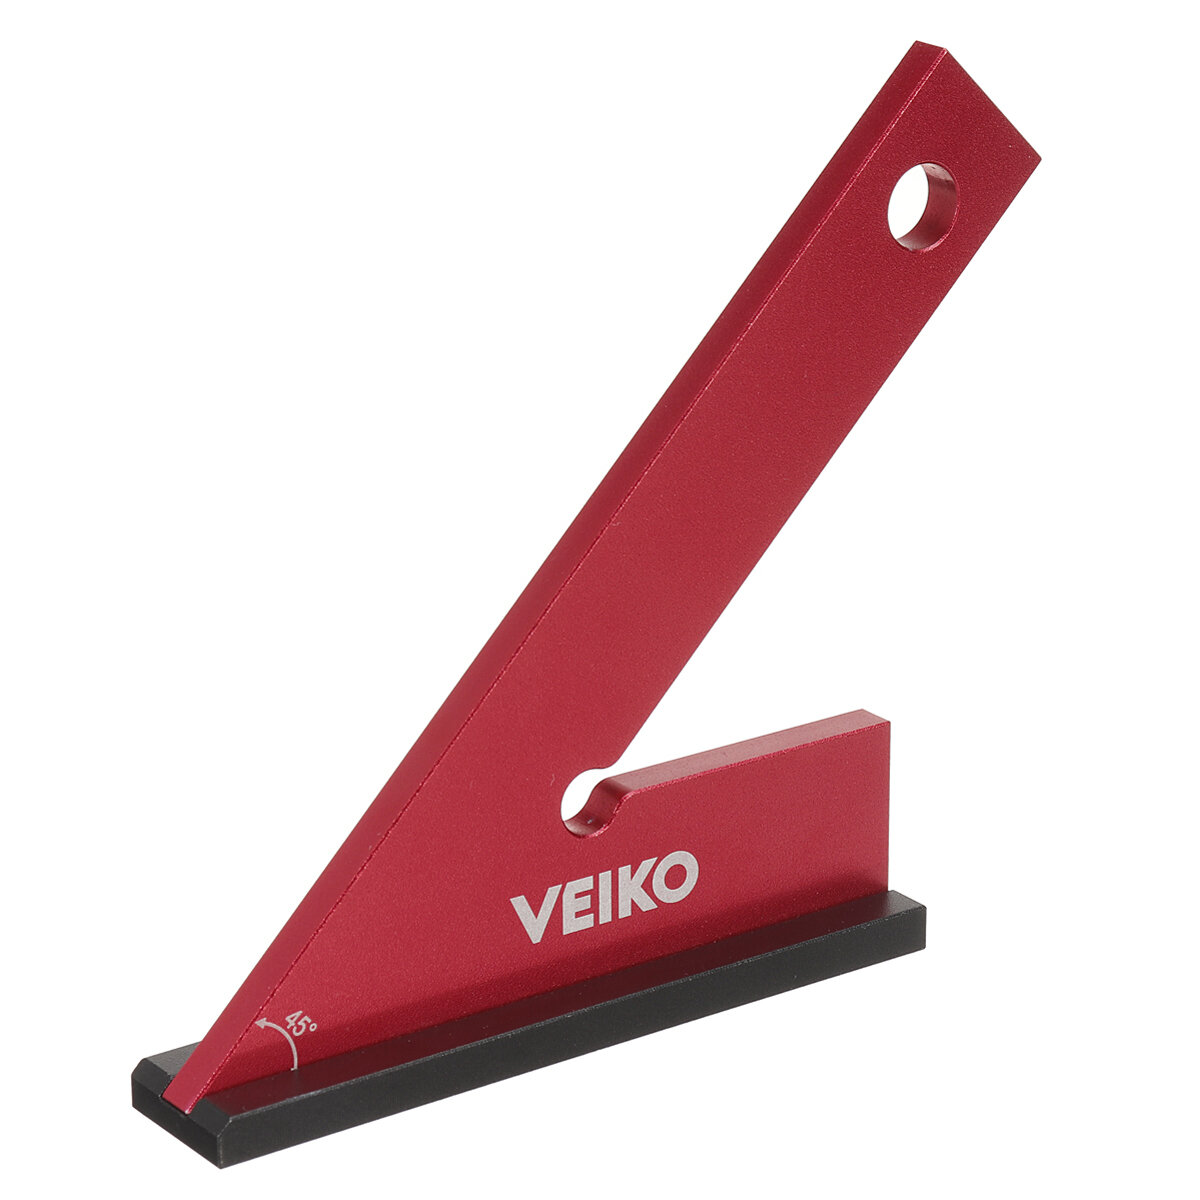 

VEIKO Aluminum Alloy Miter Square with Base 45 Degree Right Angle Ruler Miter Angle Corner Ruler Woodworking Measuring T